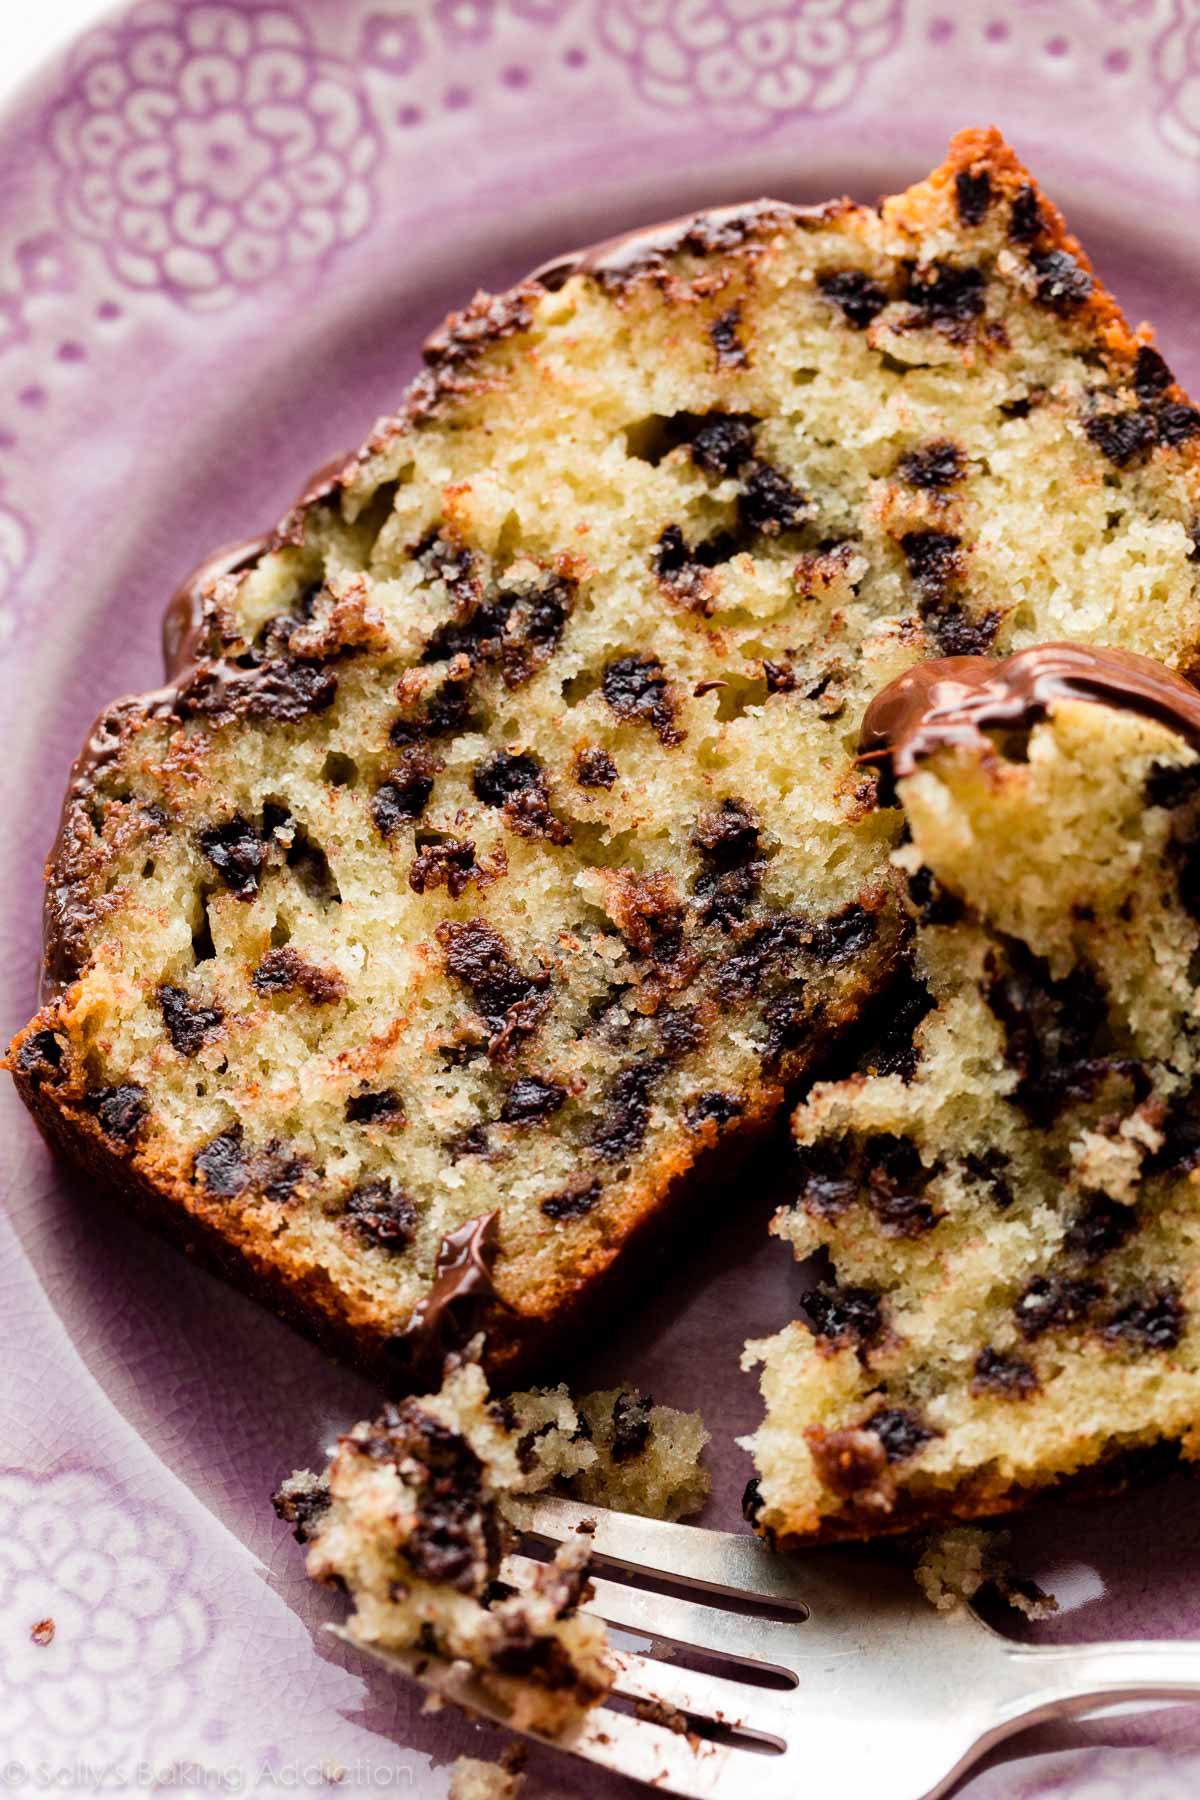 butter loaf cake with chocolate chips